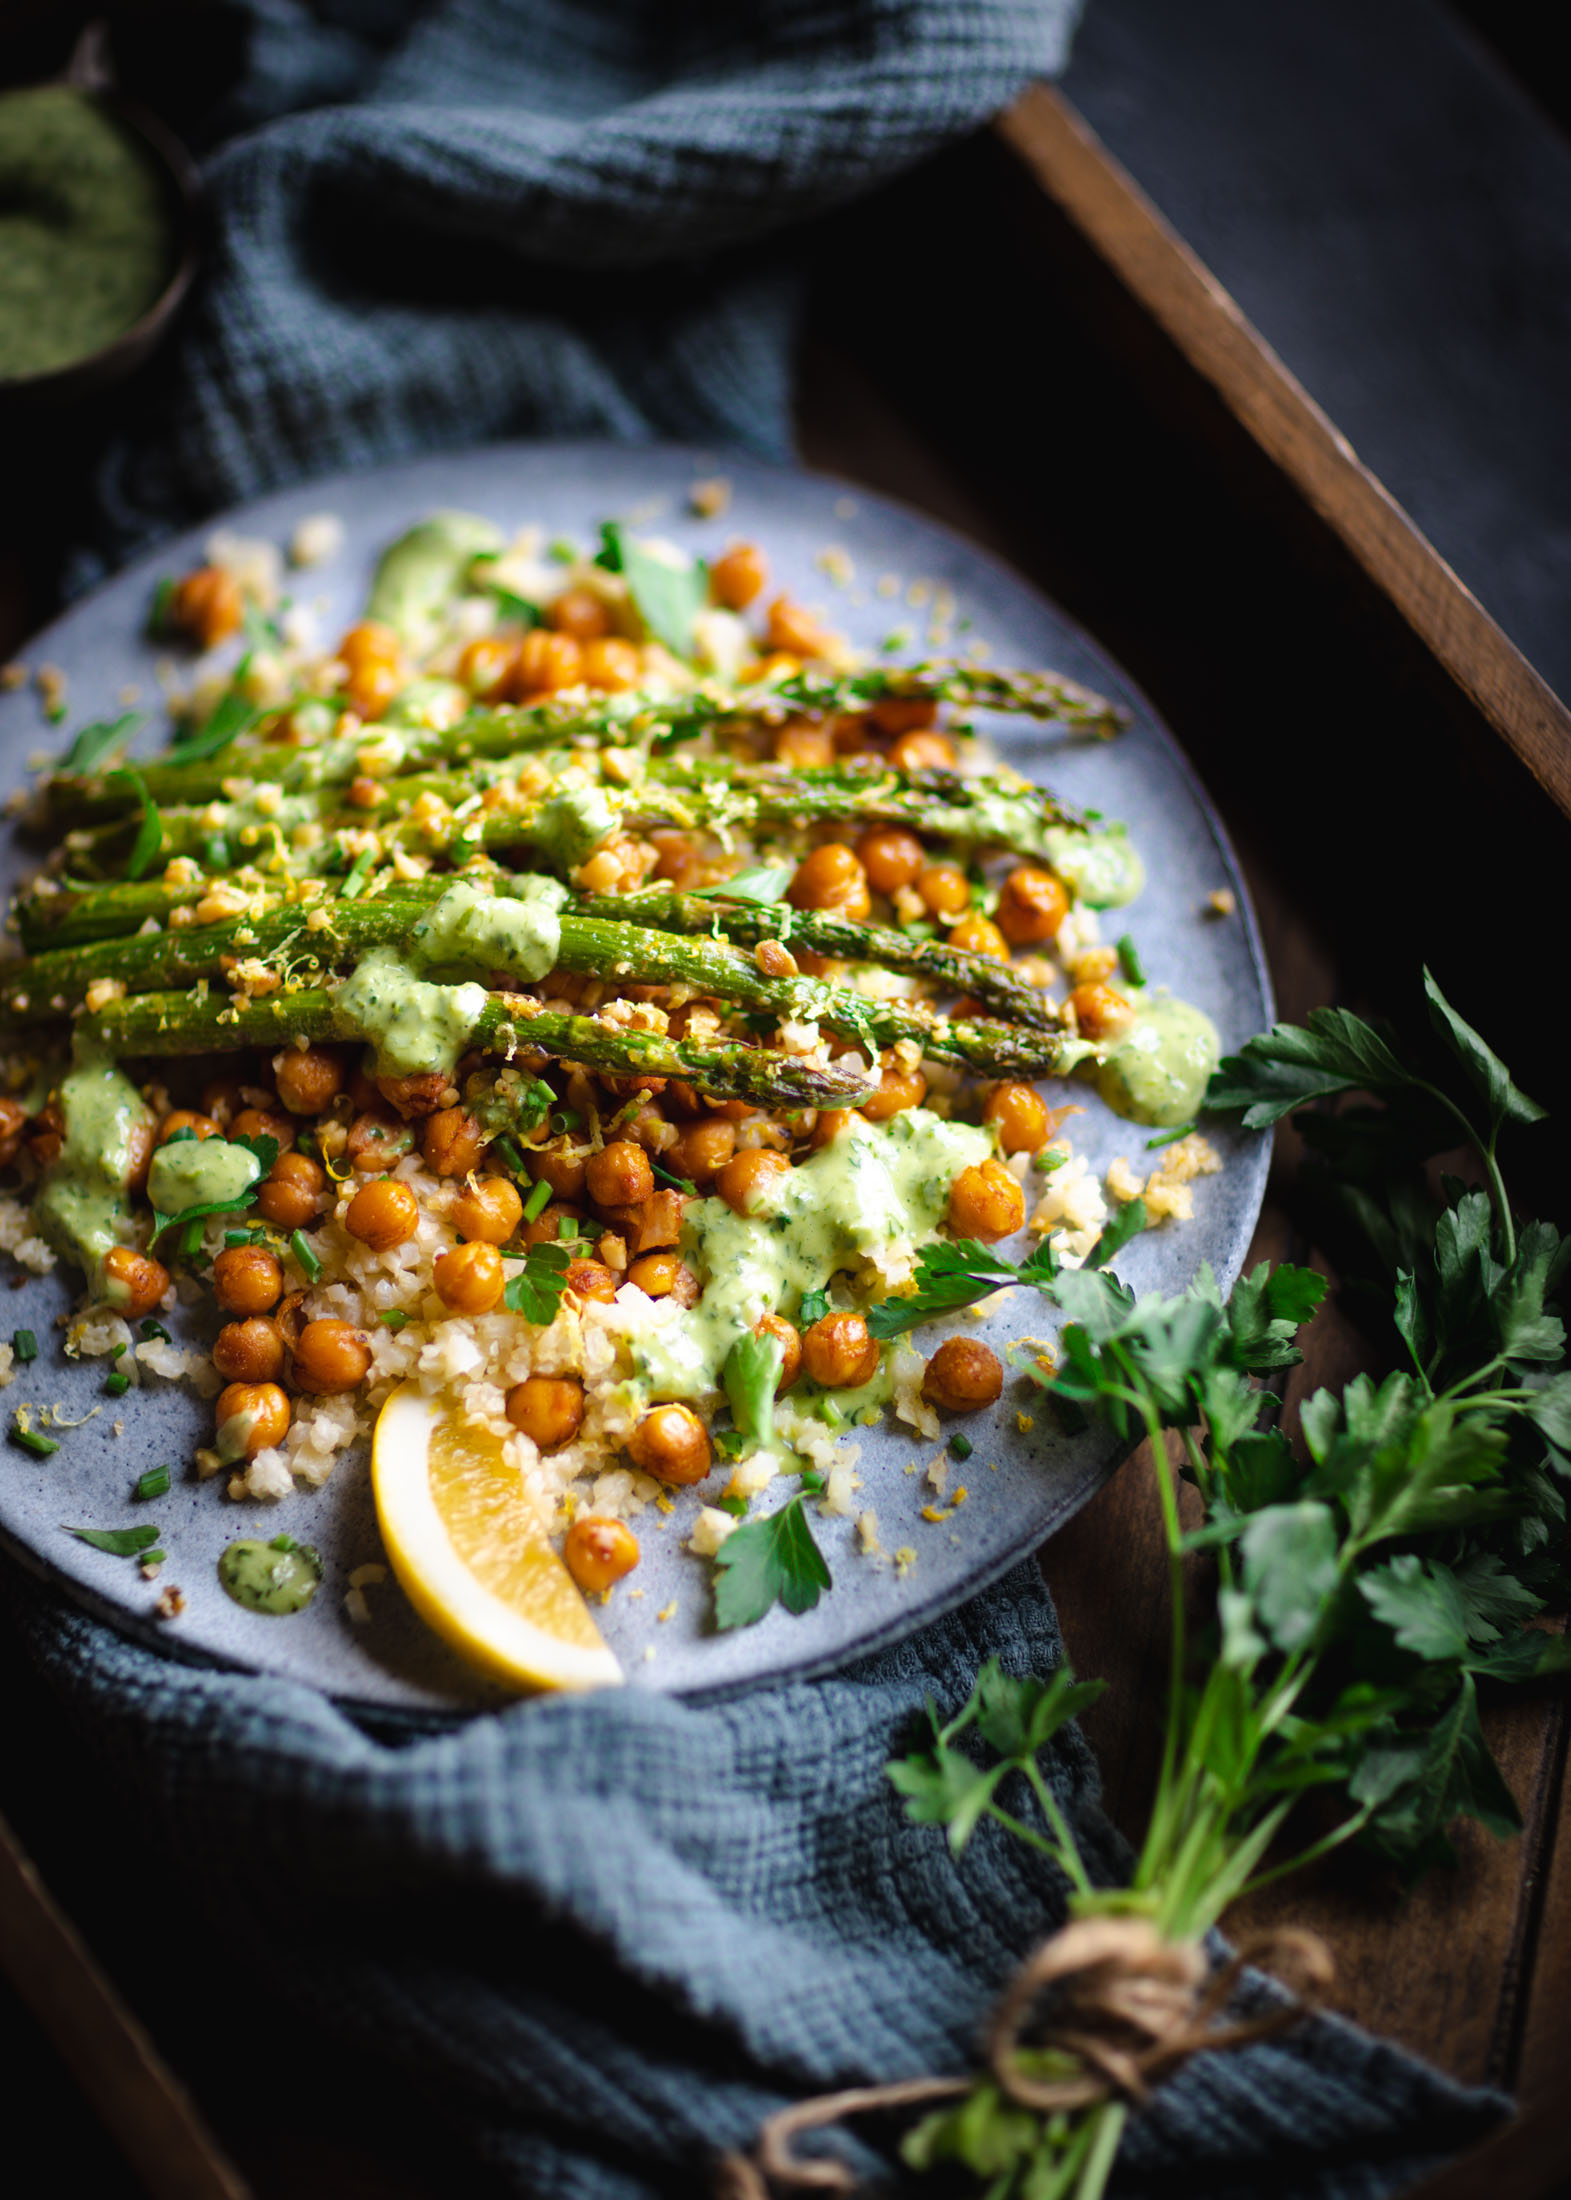 Walnut Crusted Asparagus with Chickpeas